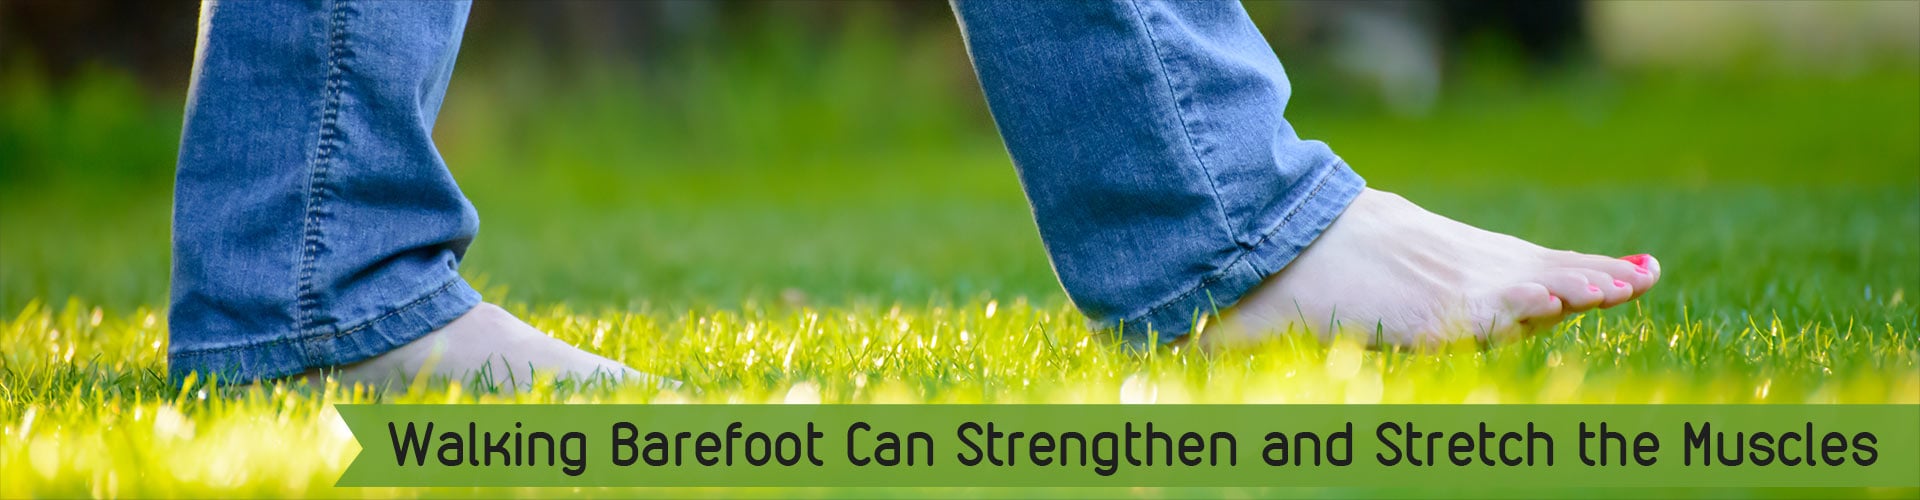 Walking Barefoot Can Strengthen and Stretch the Muscles